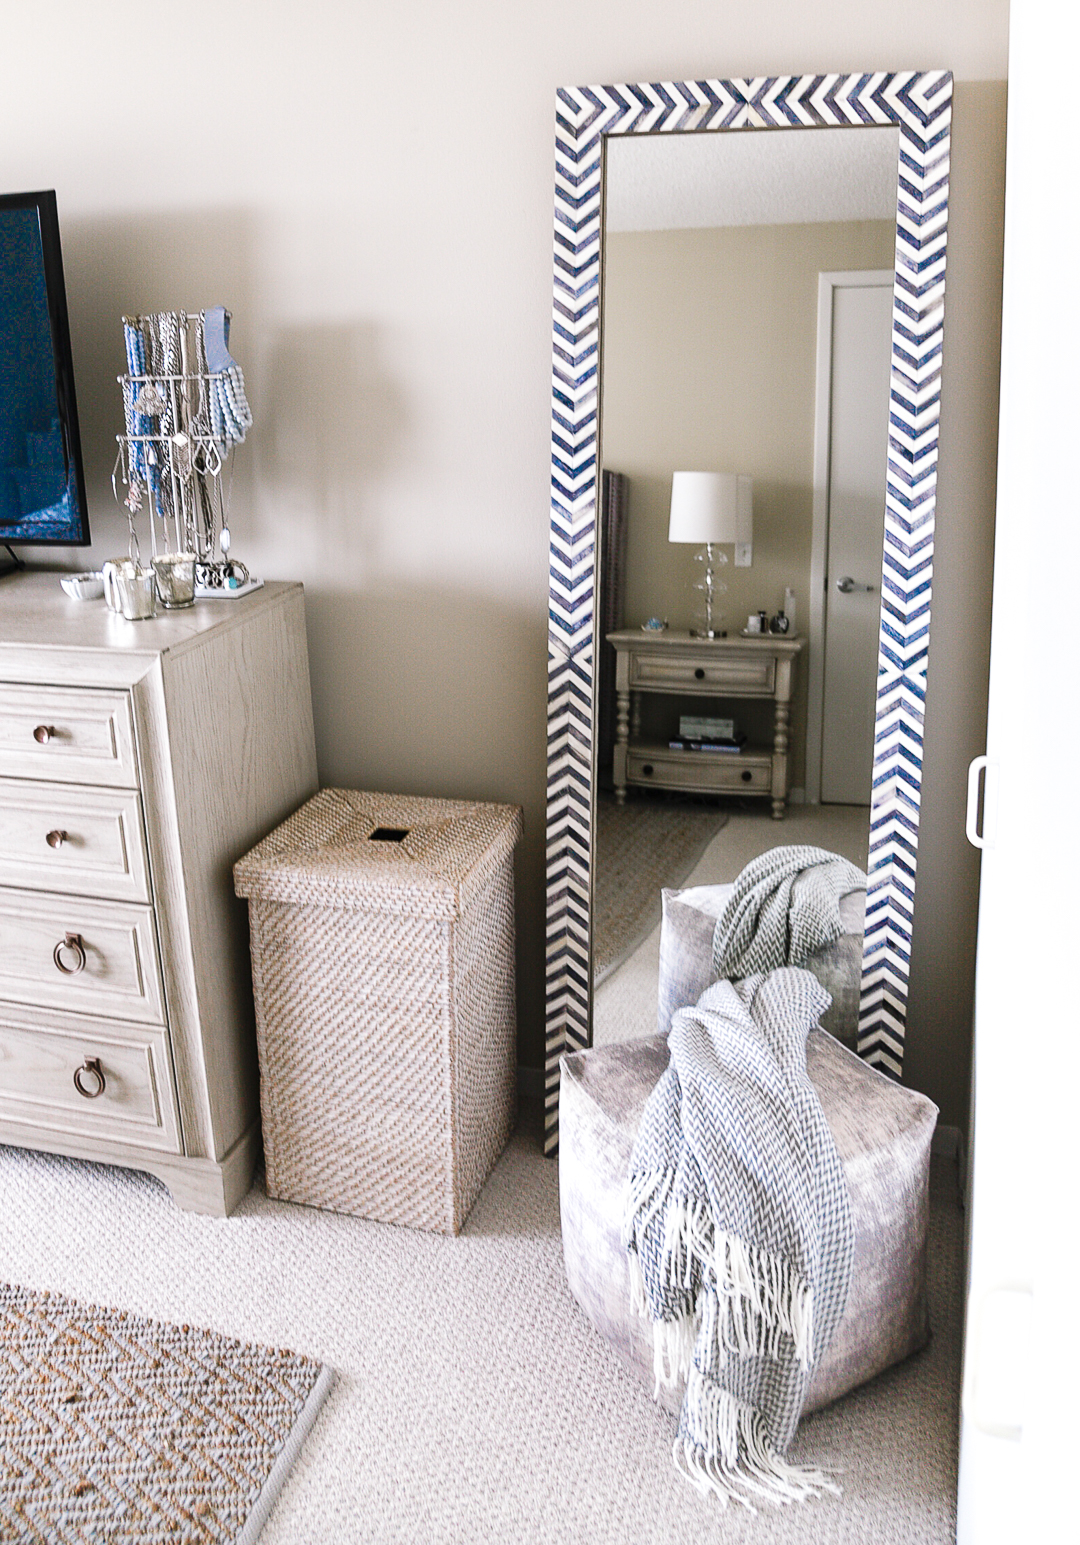 Textured hamper, velvet pouf, chevron throw, and herringbone floor mirror. - Master Bedroom Ideas with Home Decorators by Chicago style blogger Visions of Vogue